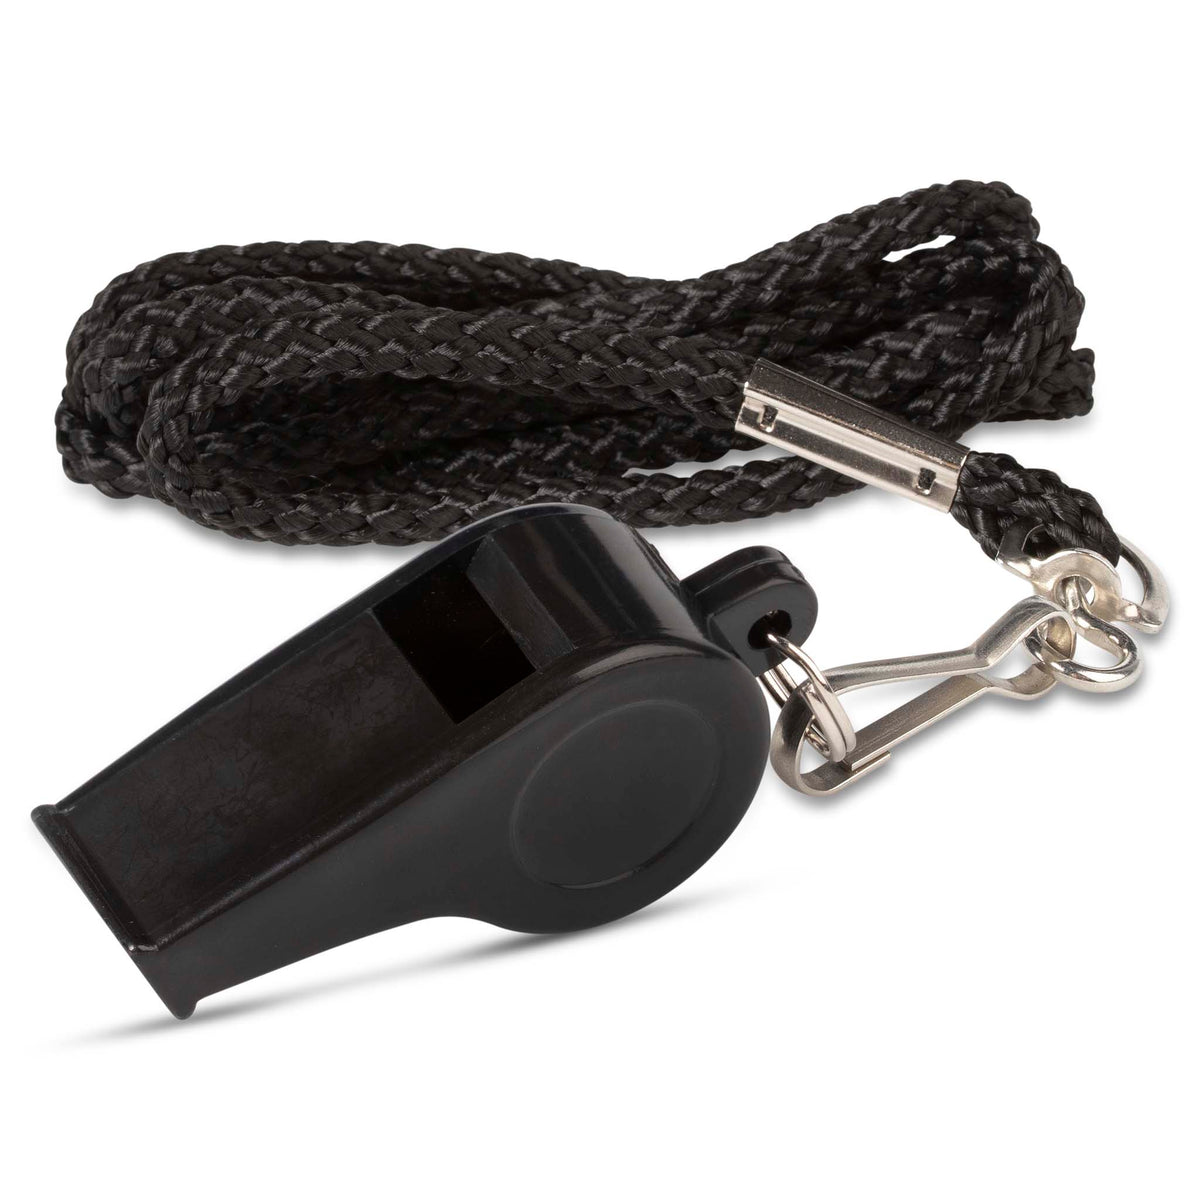 Nickel Plated Brass Whistle with Lanyard - Incident Command Supplies